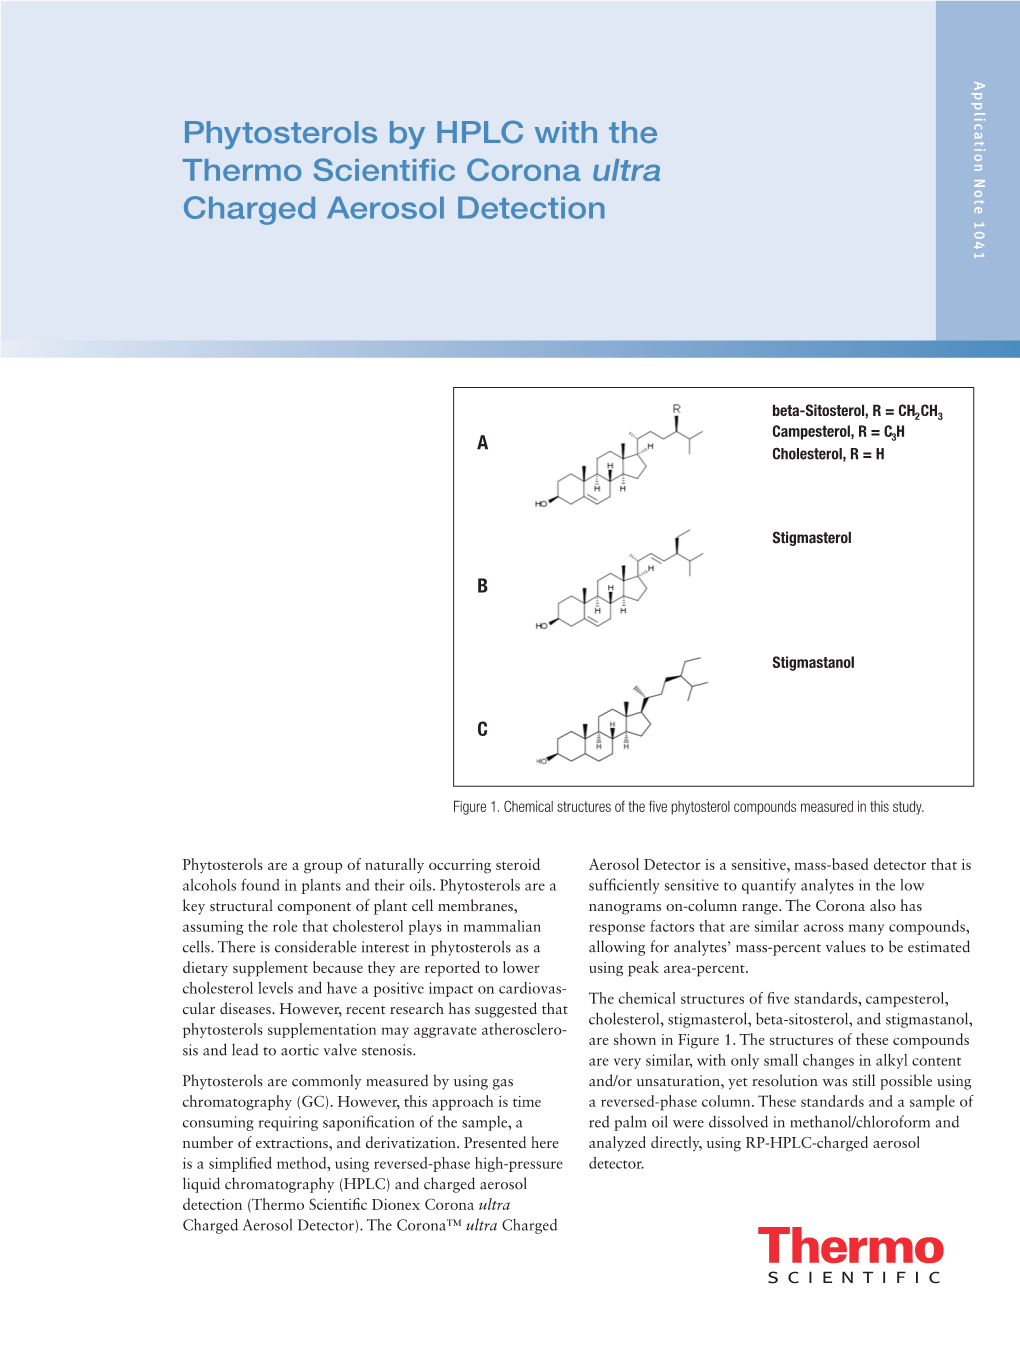 Phytosterols by HPLC with the Corona Ultra Charged Aerosol Detection